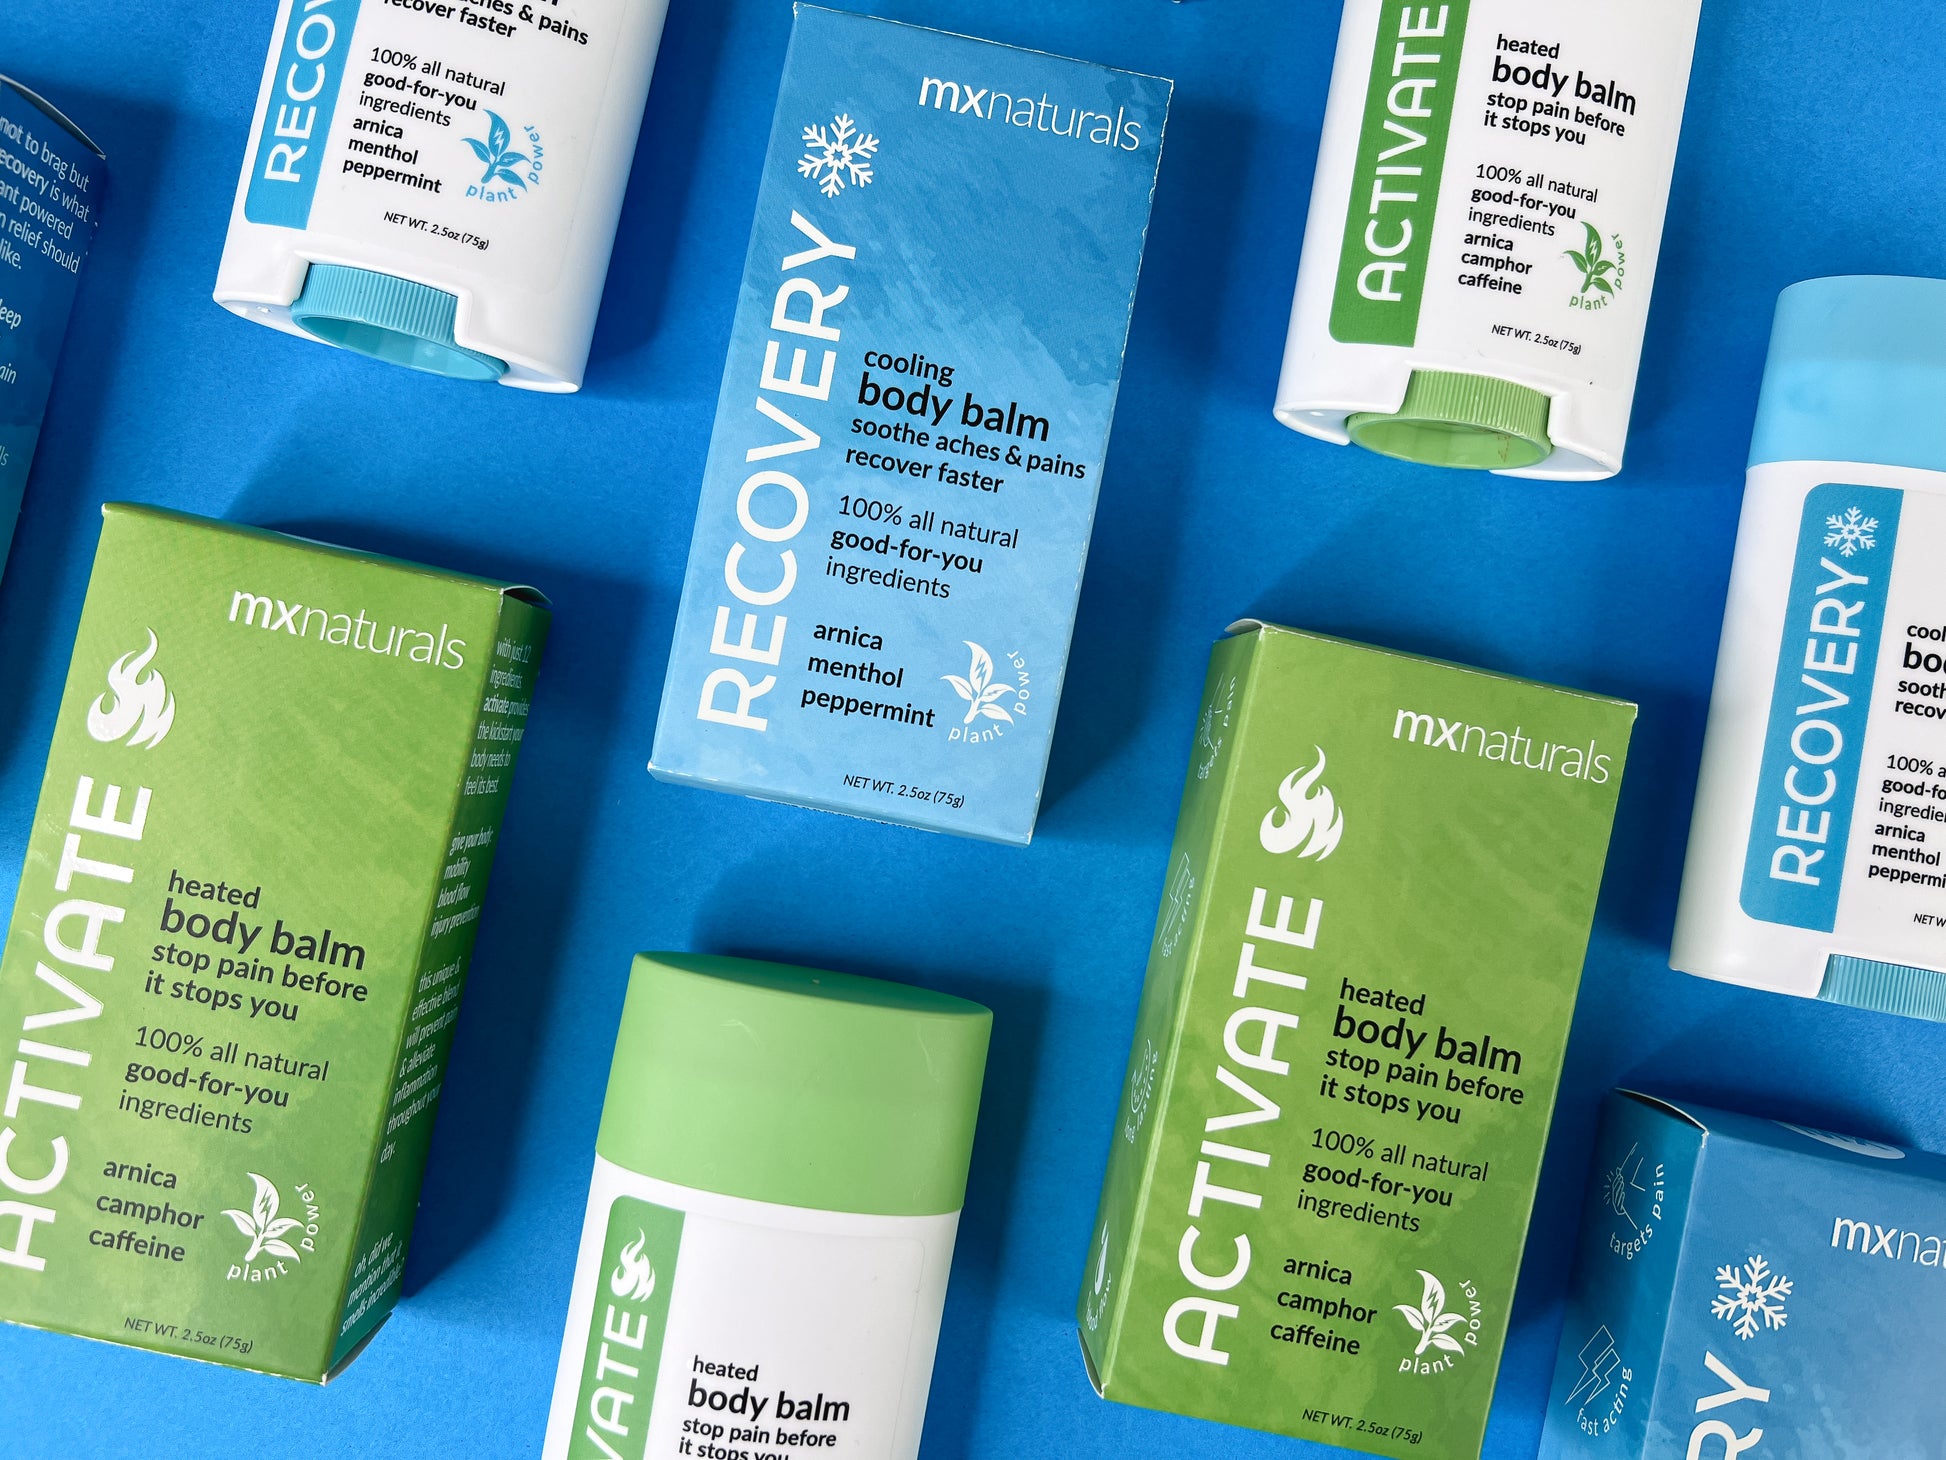 flat lay design of green and white products called activate heated body balm and blue and white recovery cooling body balm alternating on top of a blue background.